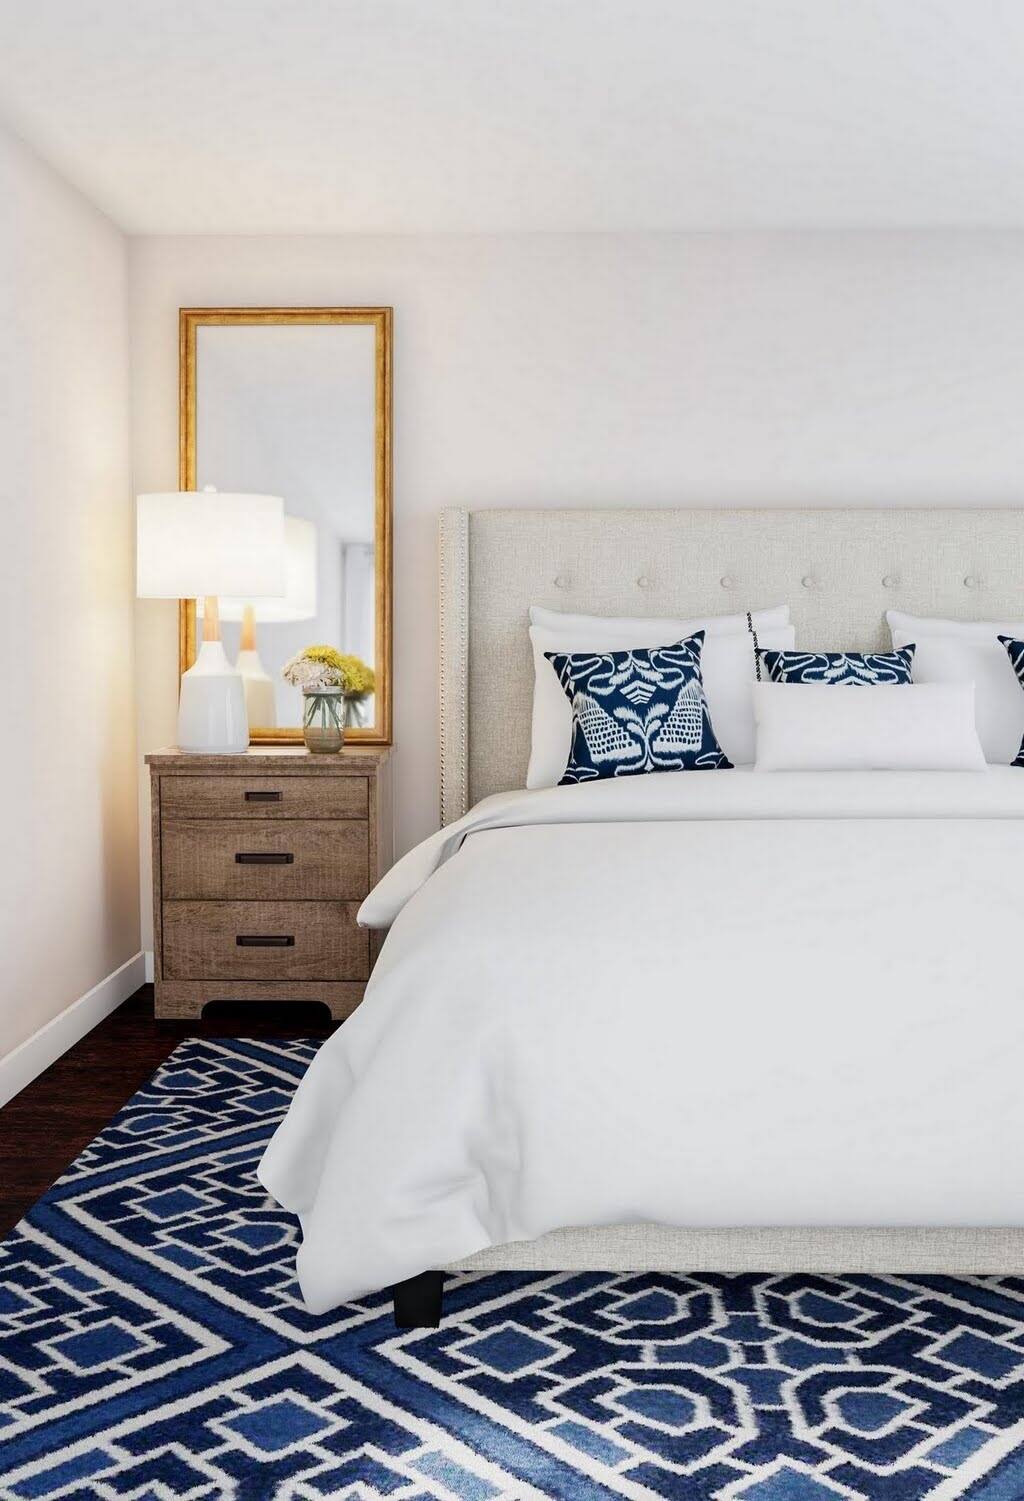 Classic Blue-Patterned Bedroom